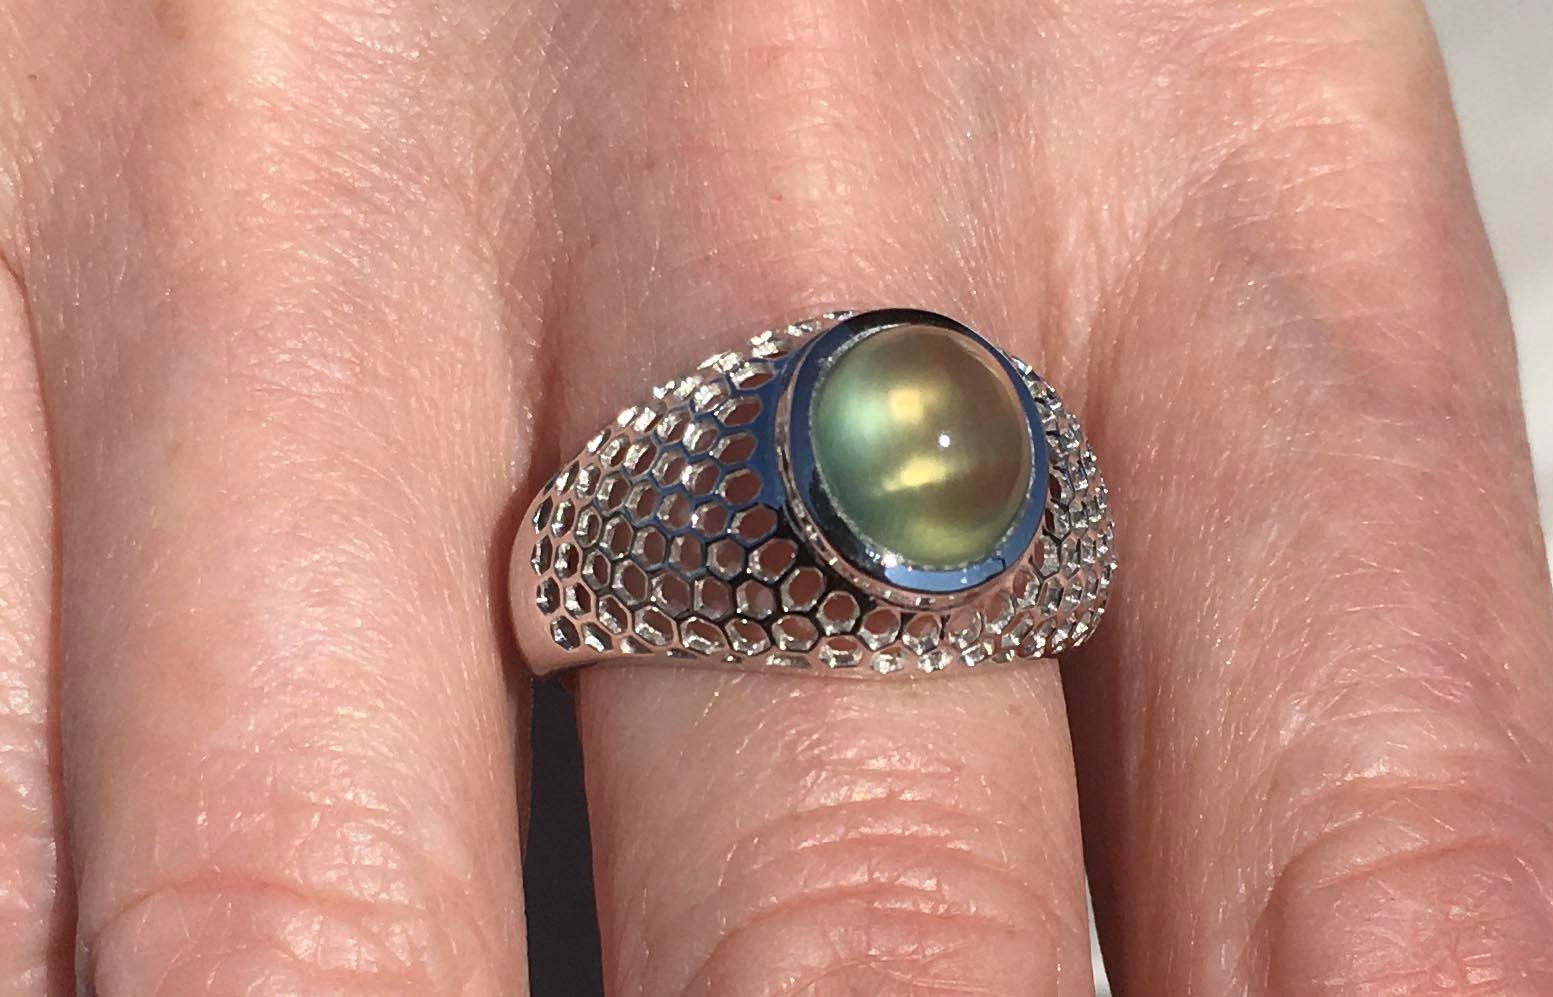 A Kary Adam Designed, 18kt White Gold Ring set with a Zambian Prehnite Oval Cabochon. Prehnite weight is 2.33 Carats, 18kt Gold weight is 5.1 Grams. Ring size is 8 USA

Originally from San Diego, California, Kary Adam lived in the “Gem Capital of